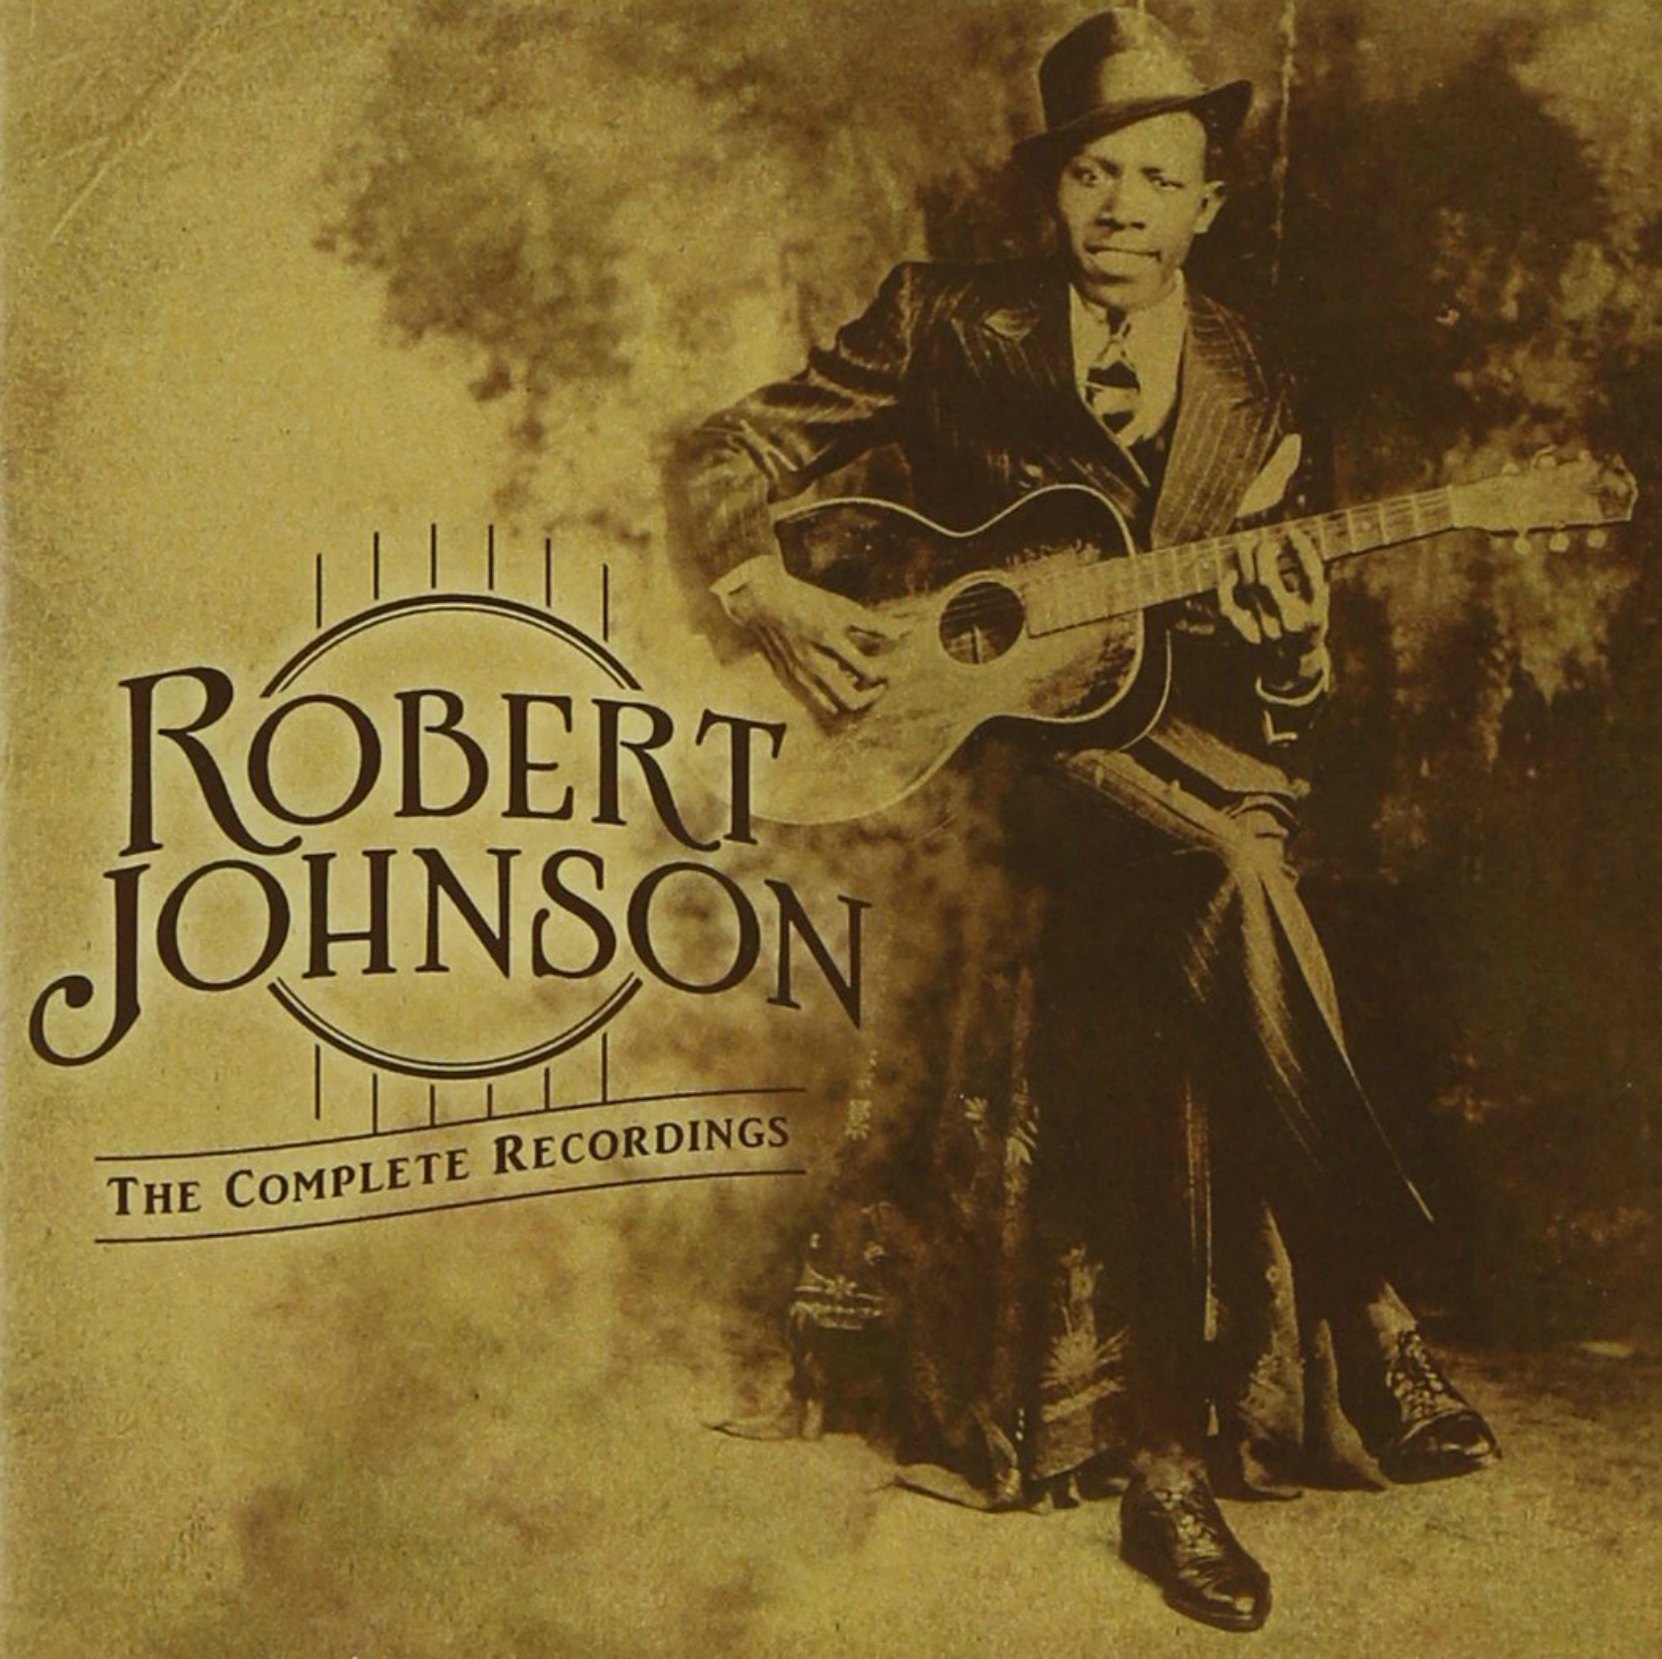 CD cover, Robert Johnson - The Complete Recordings. This is the edition we are currently recommending.